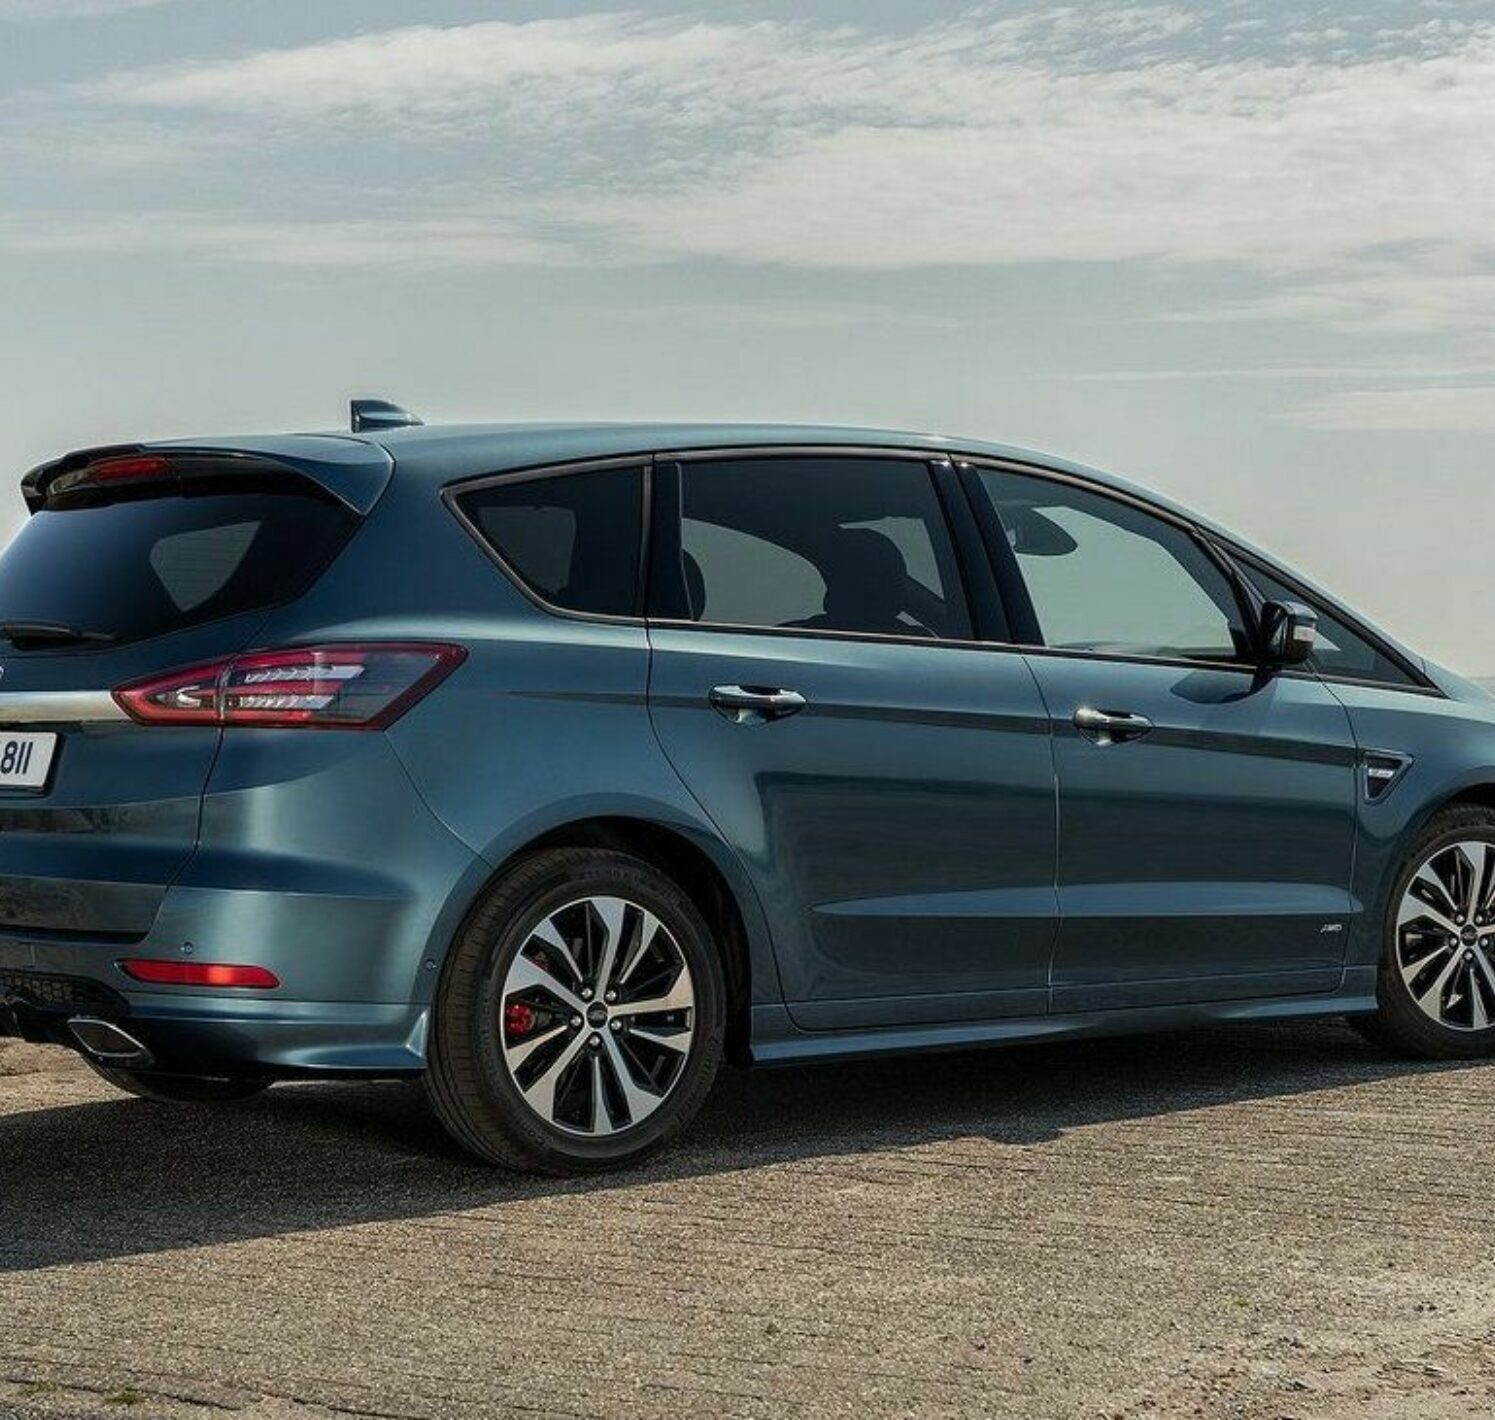 https://autofilter.sk/assets/images/s-max/gallery/ford-s-max-2020_02-galeria.jpeg - obrazok